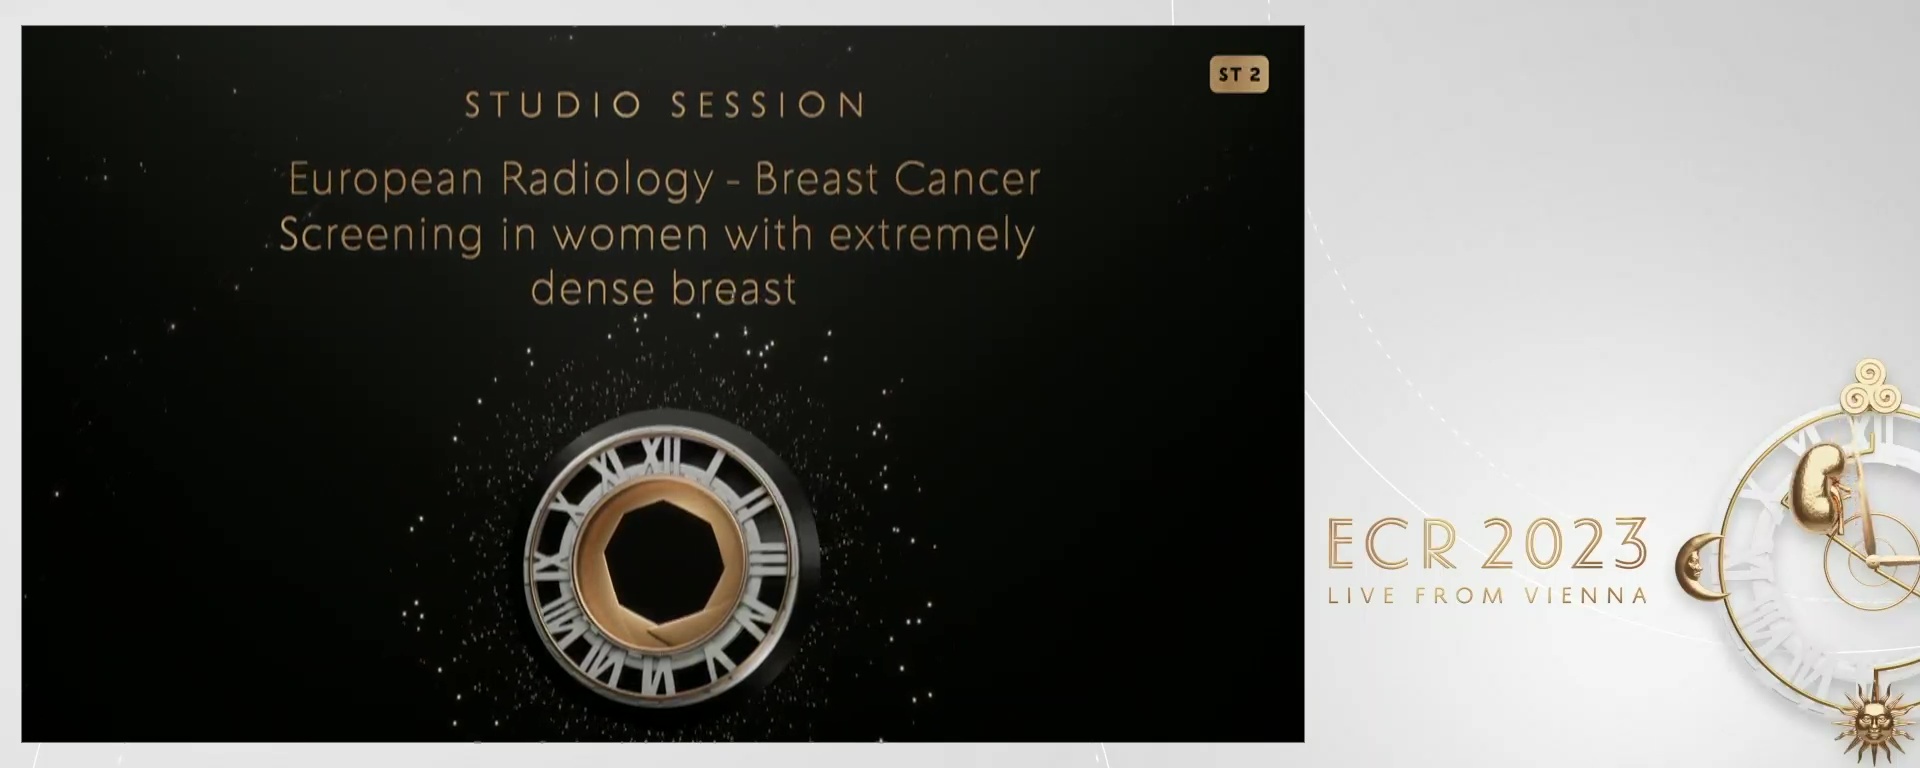 European Radiology - Breast Cancer Screening in women with extremely dense breast